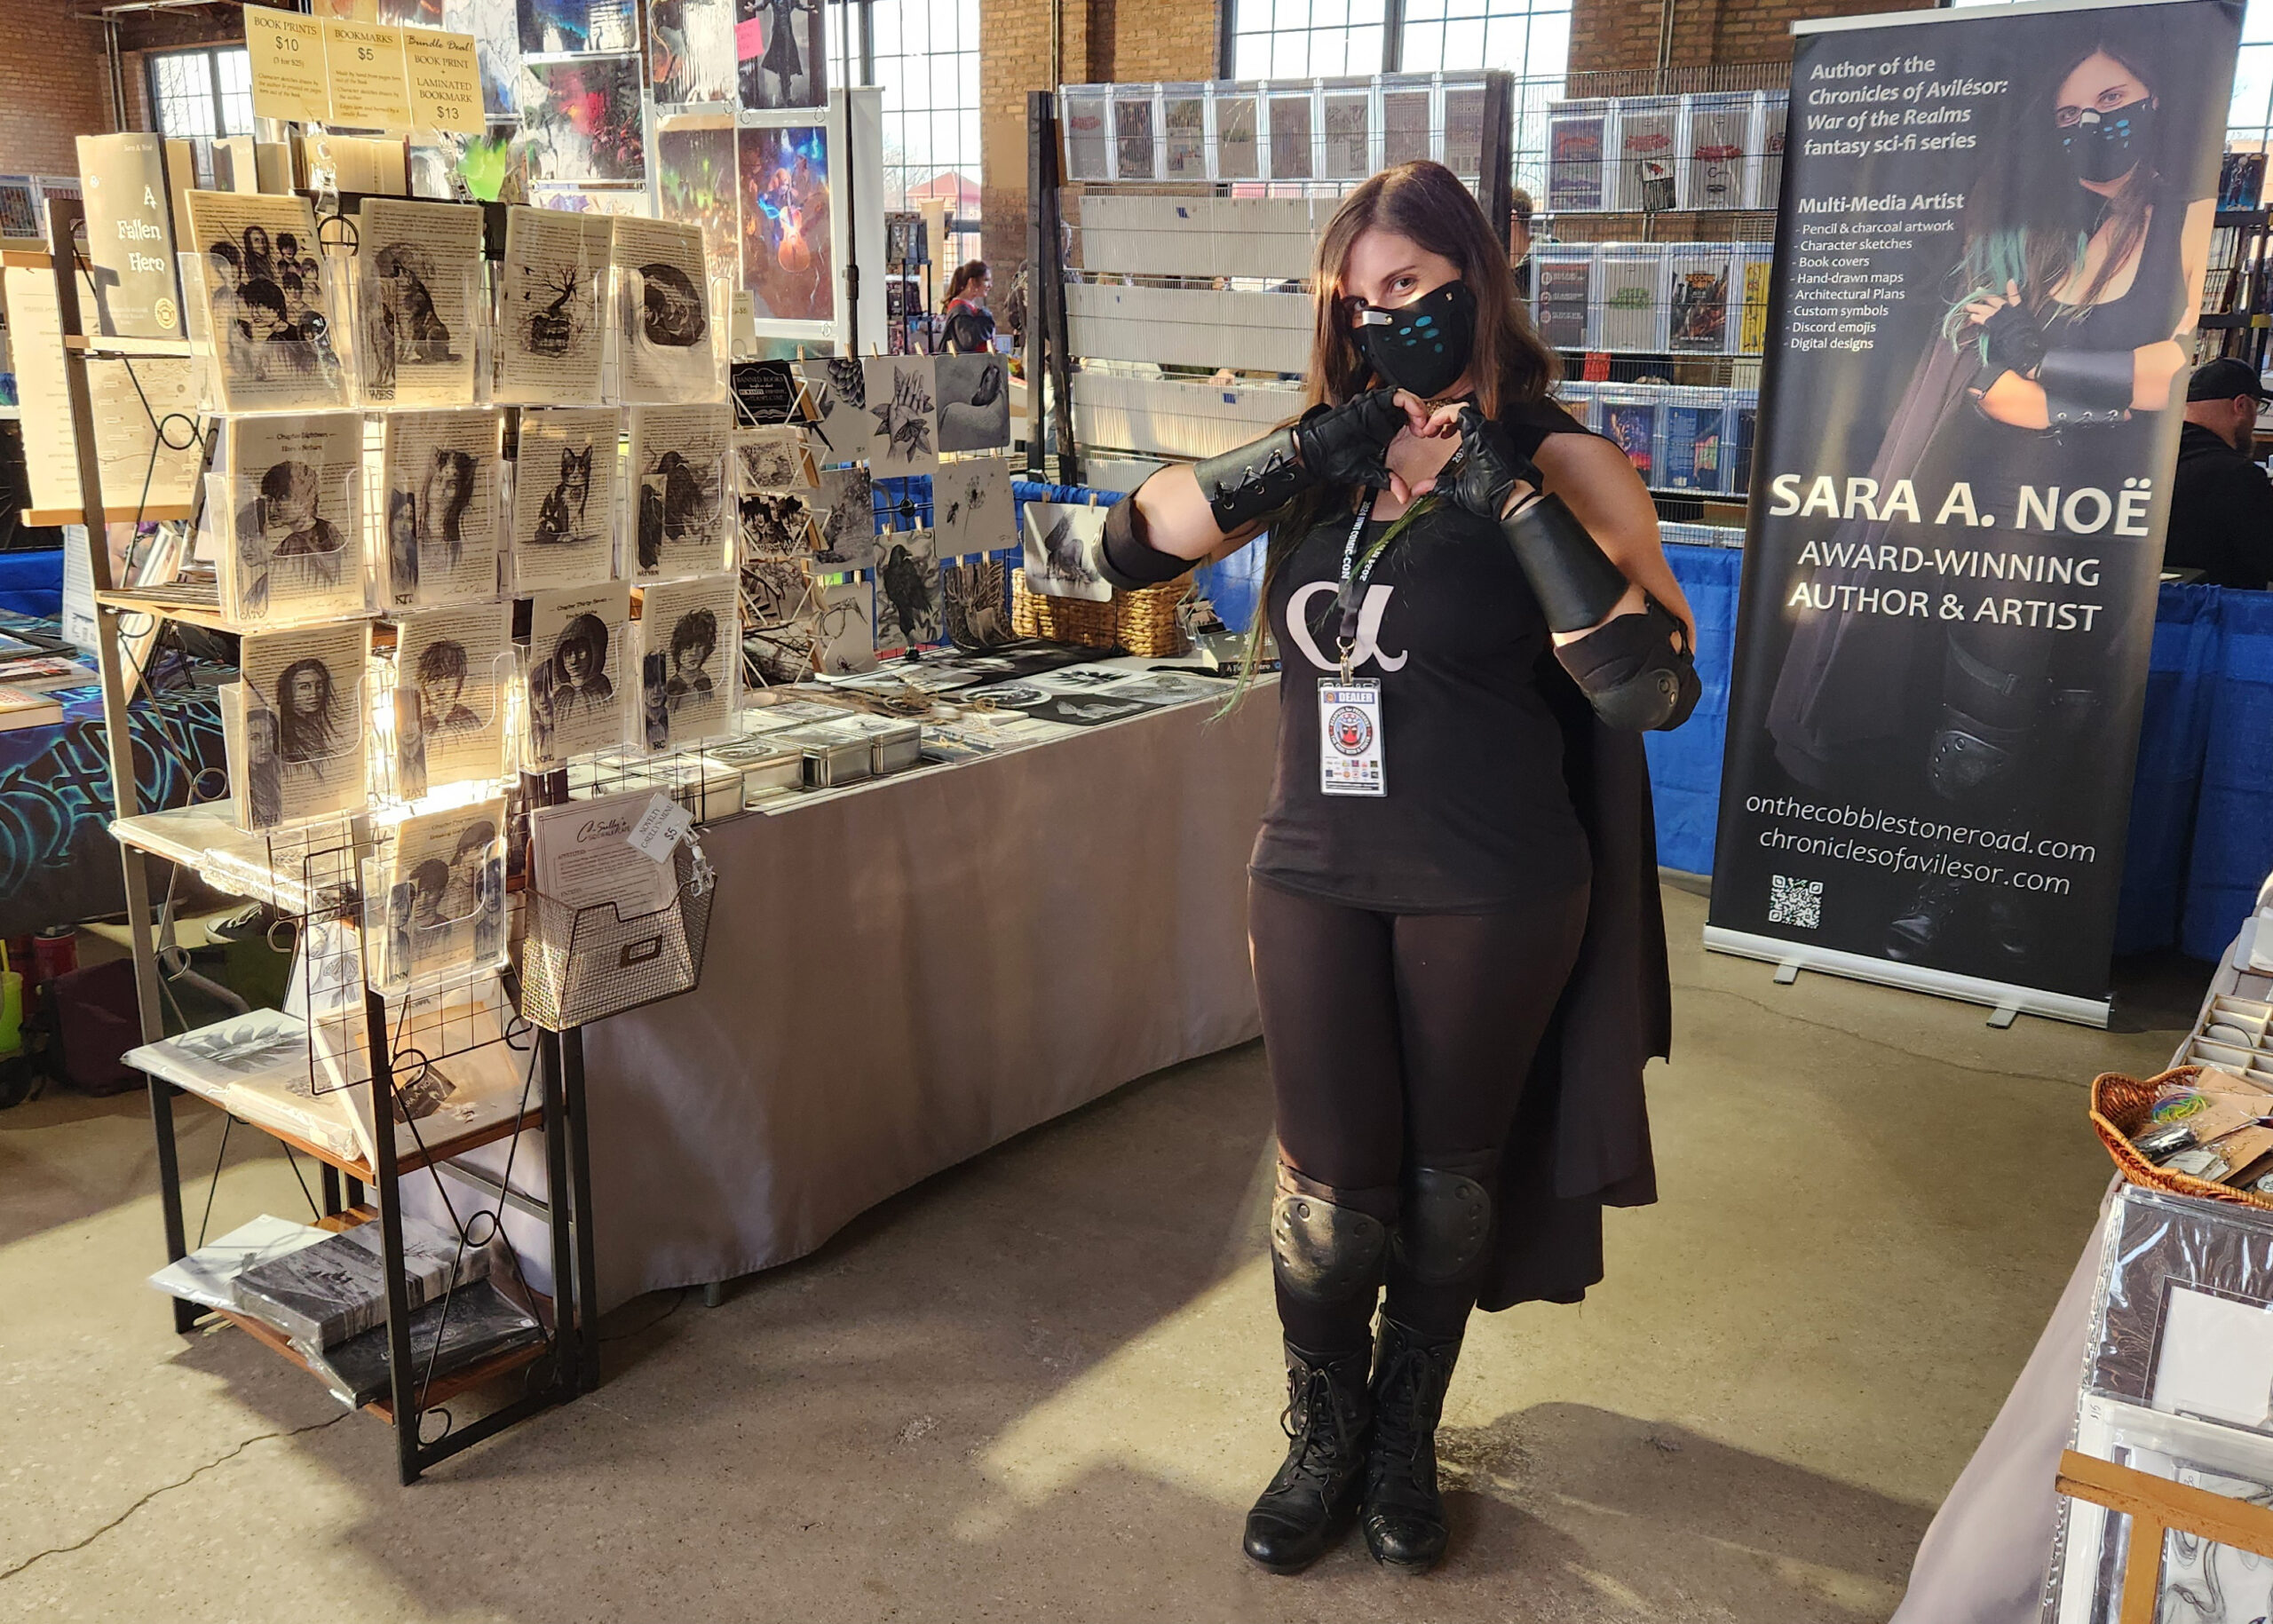 Author and artist Sara A. Noe in cosplay at the NWI Comic-Con in Crown Point, IN